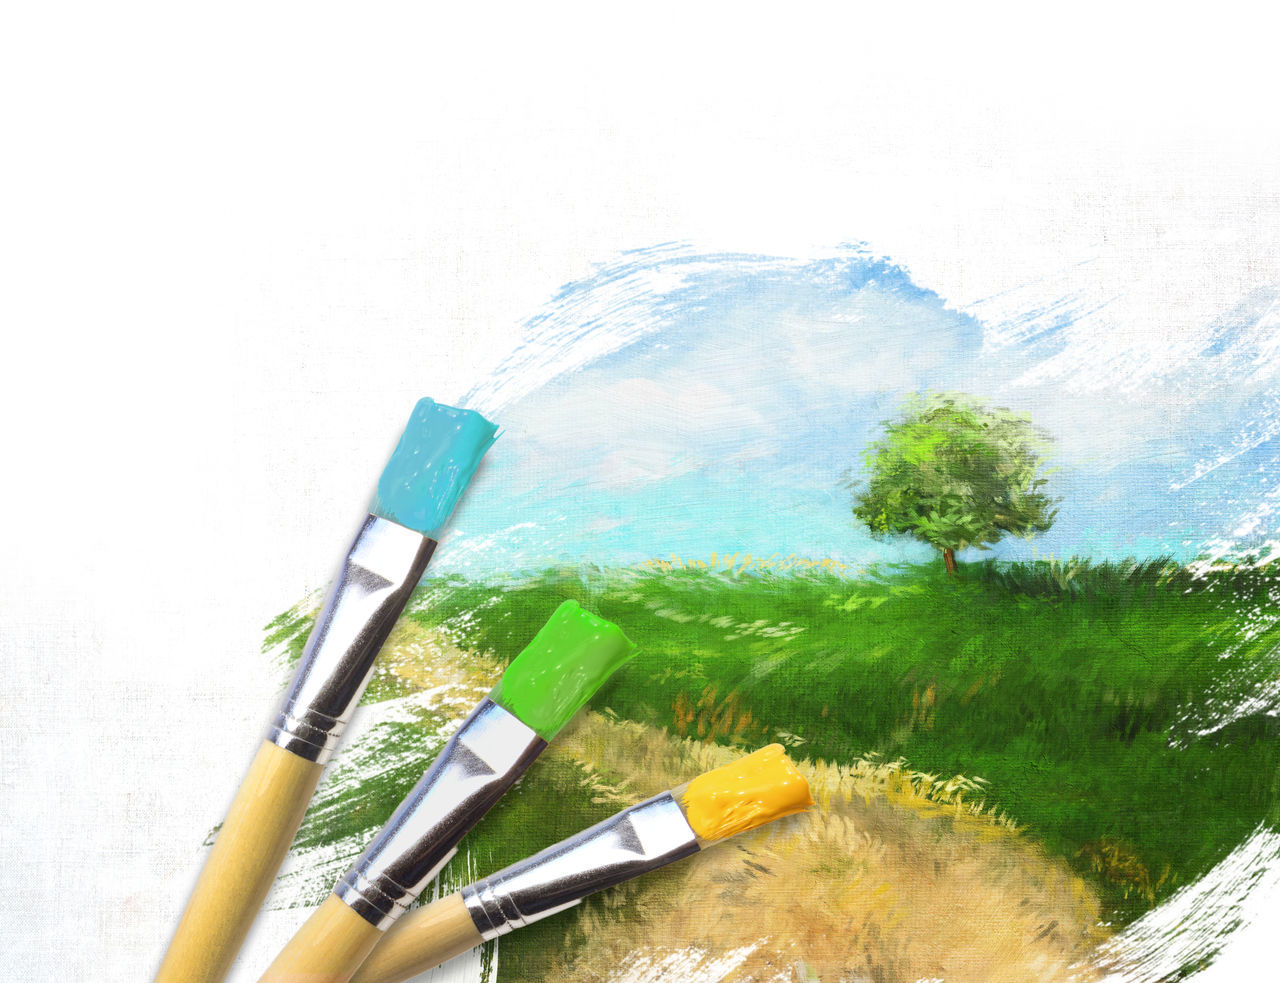 brush, paintbrush, painting, paint, no people, watercolor paint, creativity, nature, drawing, green, office supplies, plant, copy space, indoors, sketch, white background, still life, grass, palette